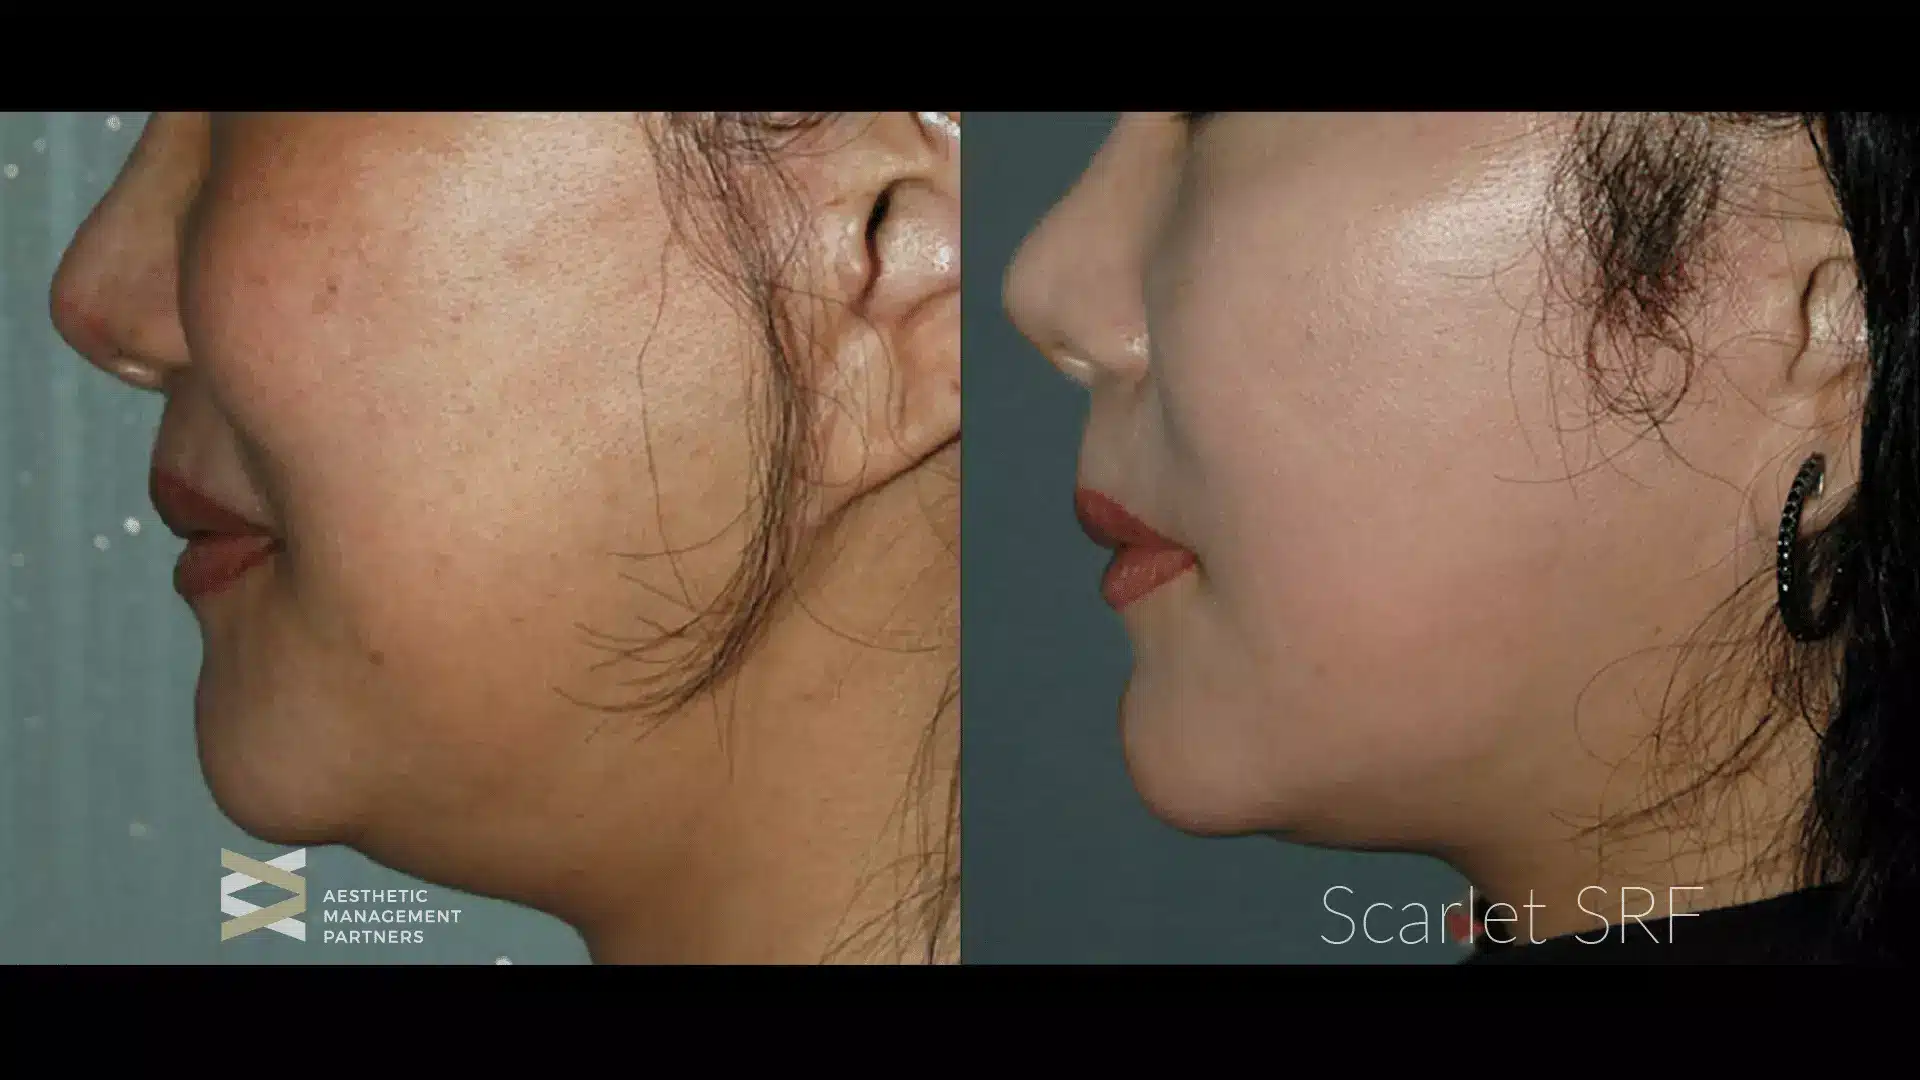 RF treatment to improve skin texture before and after